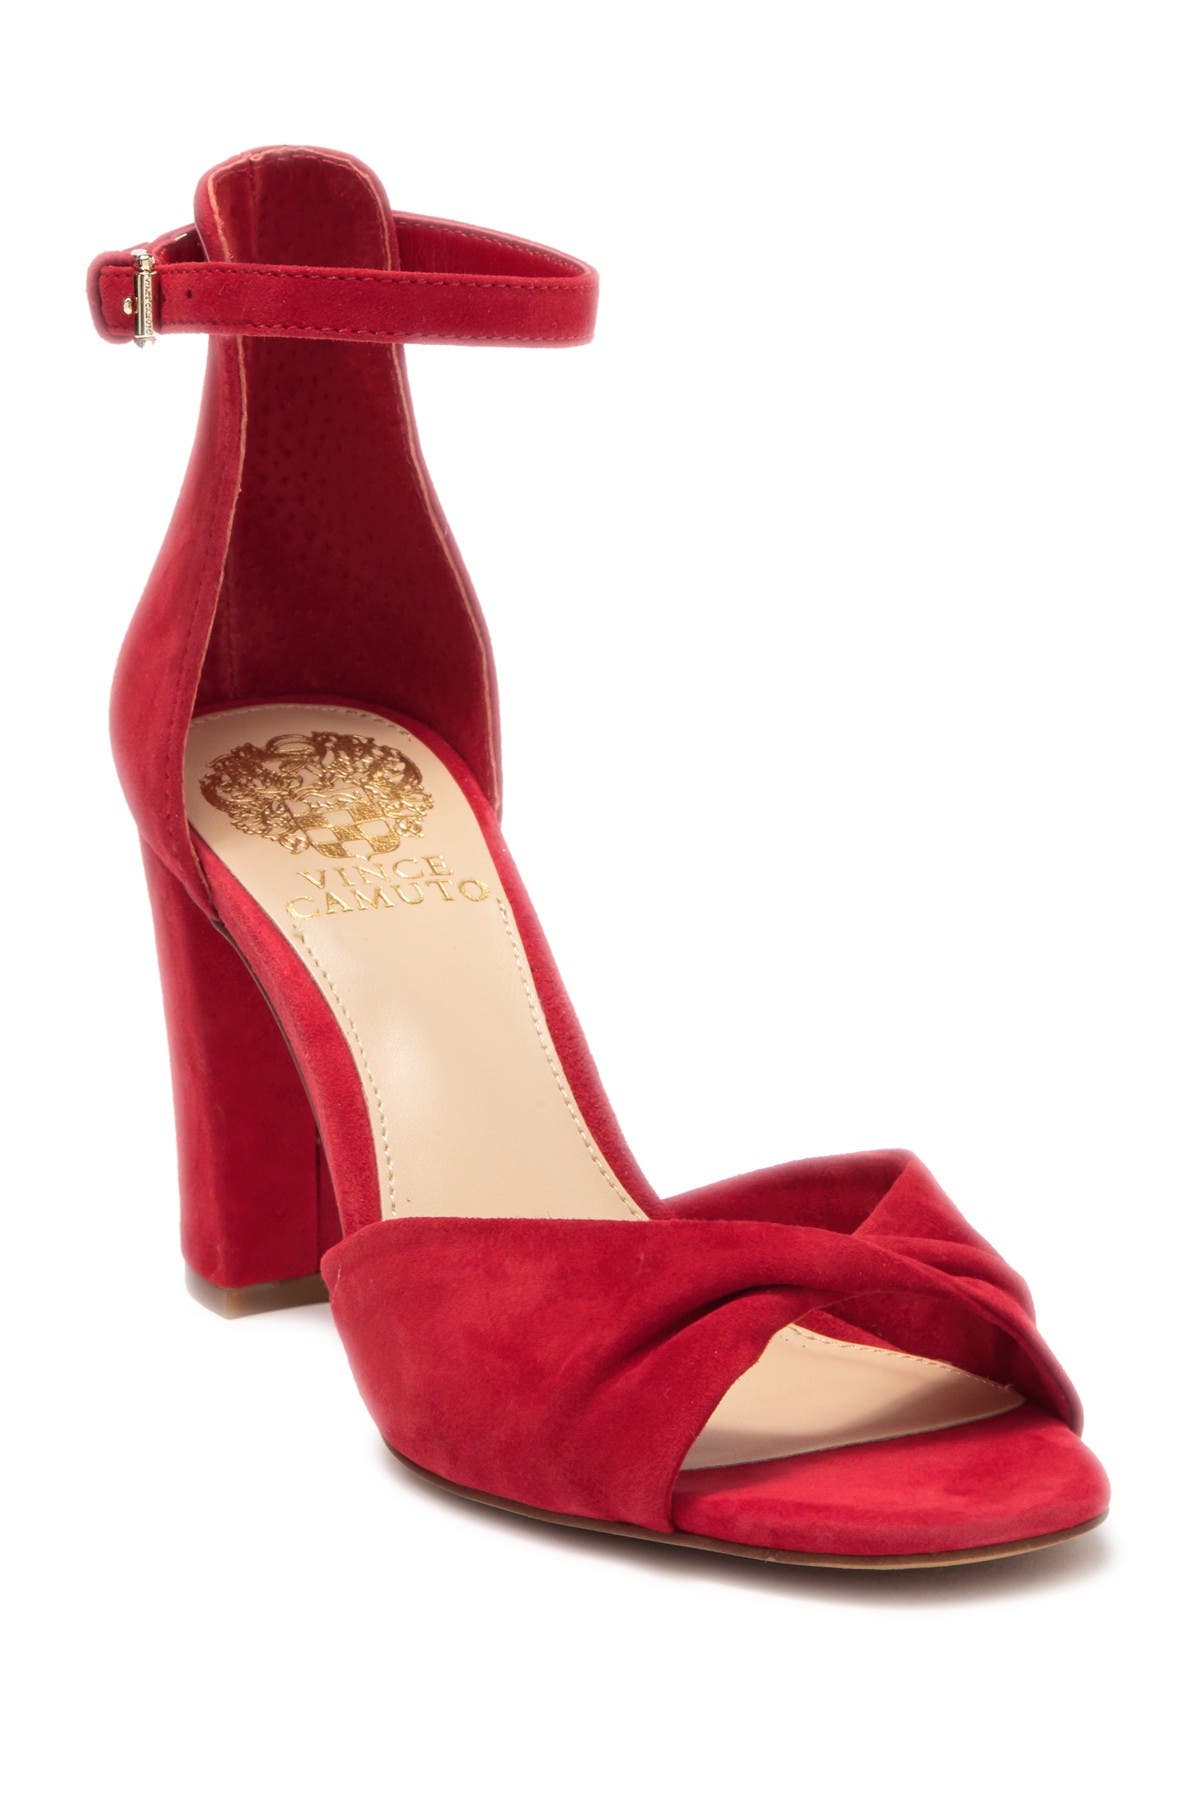 Vince Camuto | Wesher Ankle Strap 